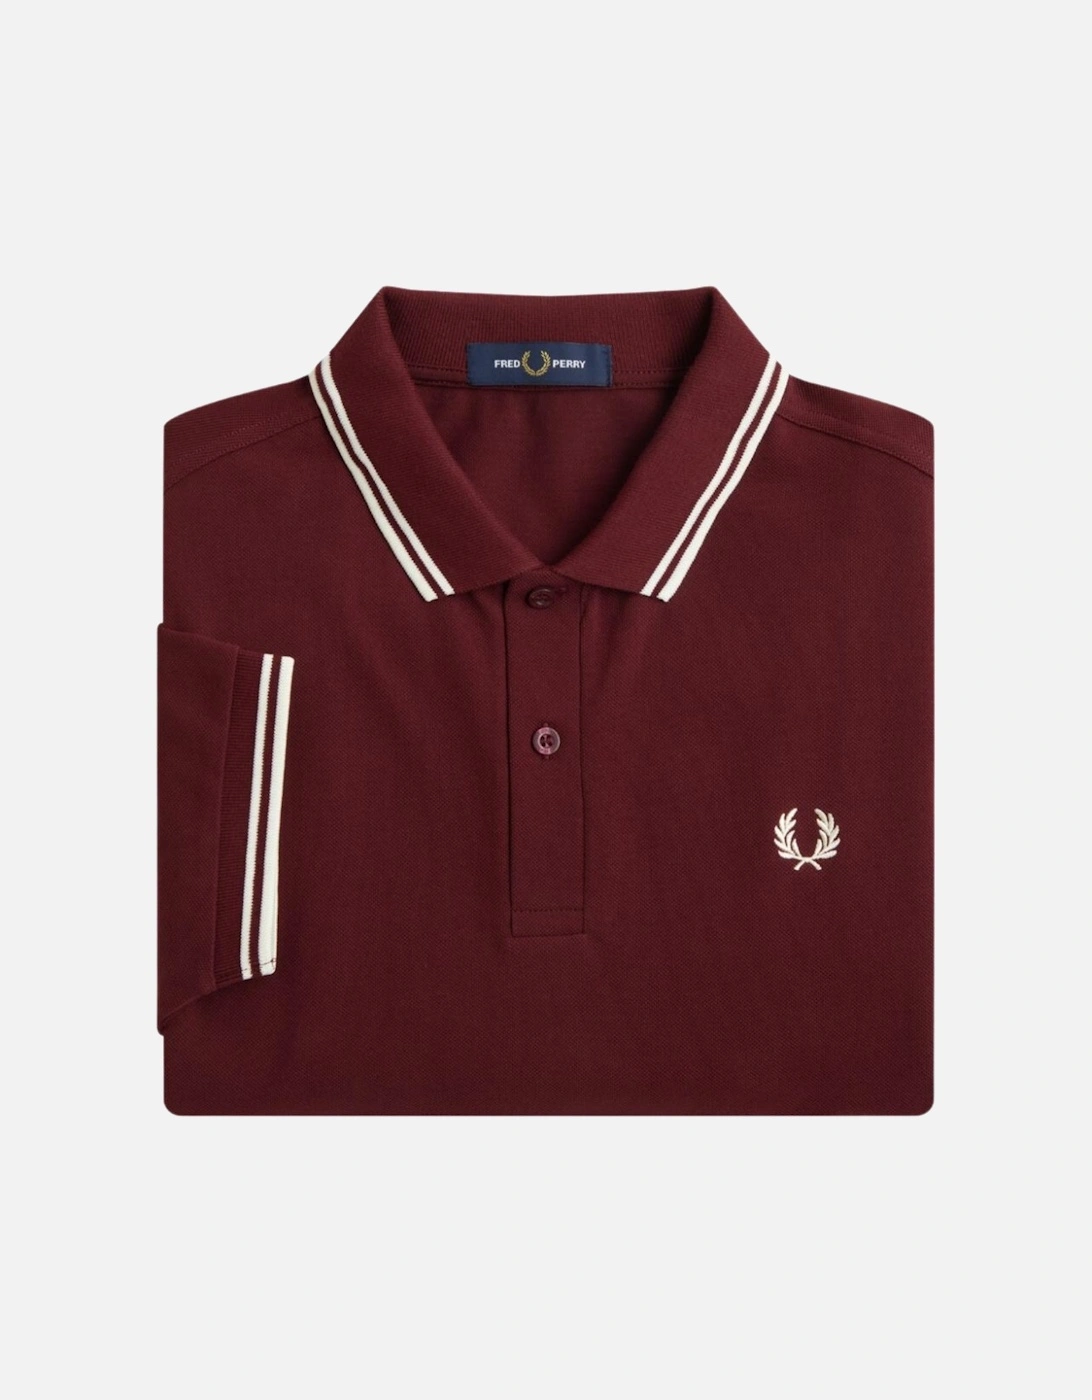 M3600 Twin Tipped FP SS Polo - Oxblood/White